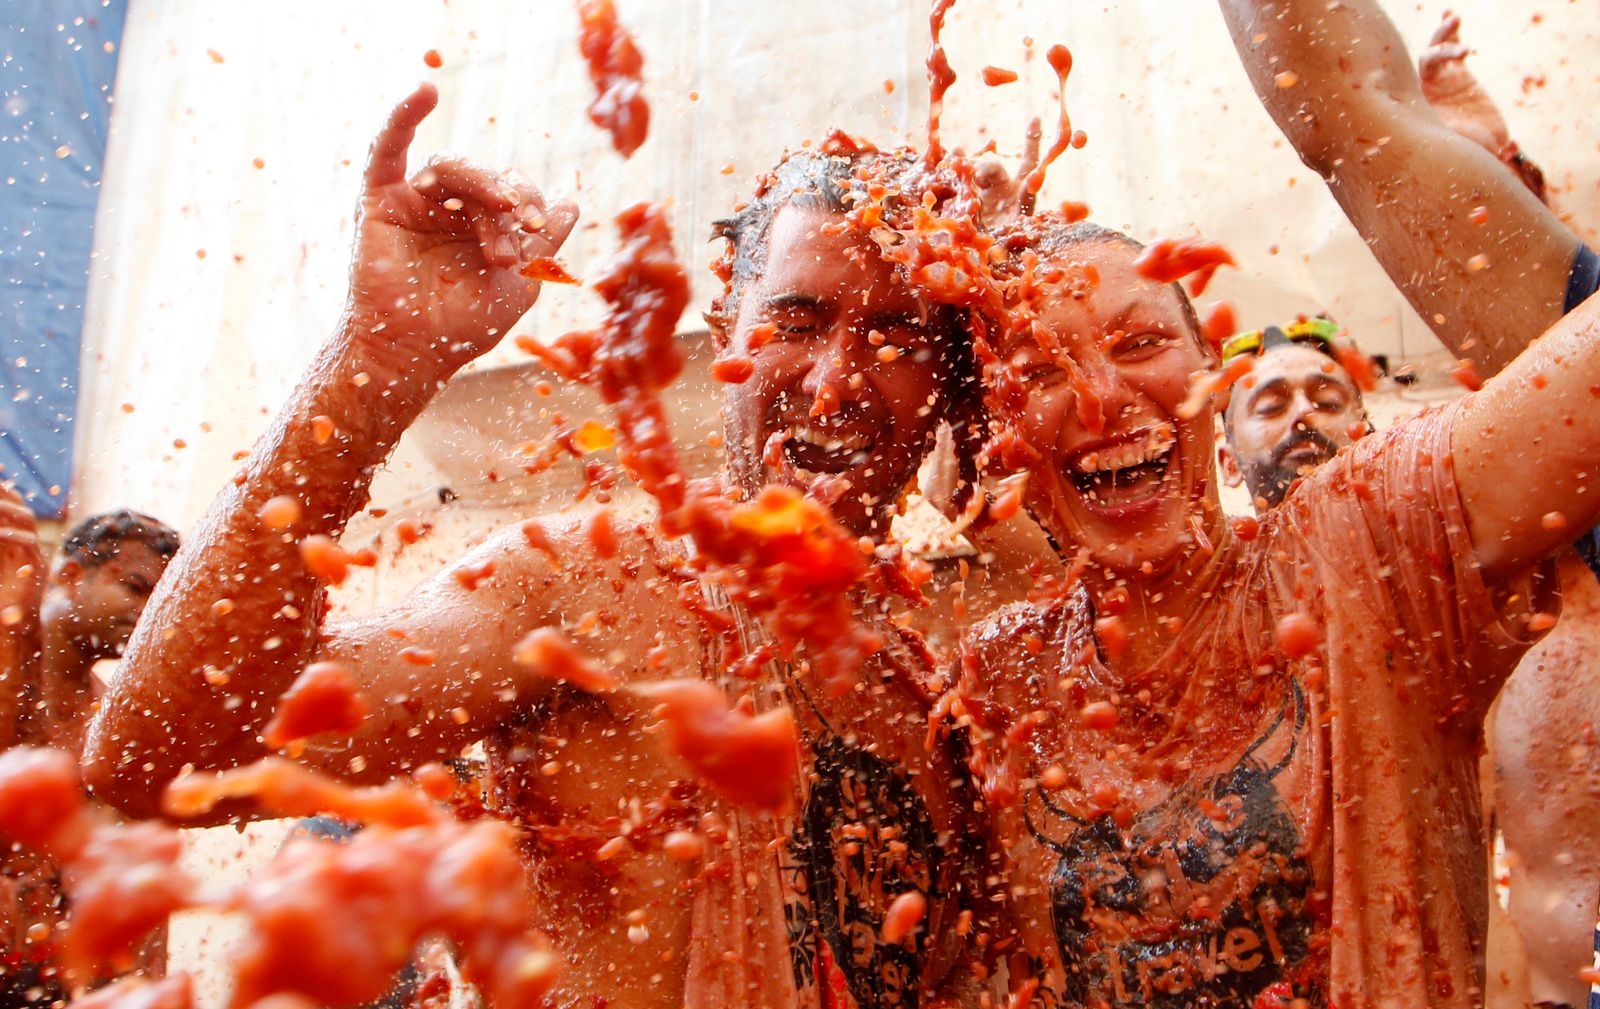 Revelers throw tomatoes during the annual "Tomatina", tomato fight fiesta, in the village of Bunol, 50 kilometers outside Valencia, Spain, Wednesday, Aug. 29, 2018. At the annual "Tomatina" battle, that has become a major tourist attraction, trucks dumped 160 tons of tomatoes for some 20,000 participants, many from abroad, to throw during the hour-long Wednesday morning festivities. (AP Photo/Alberto Saiz)